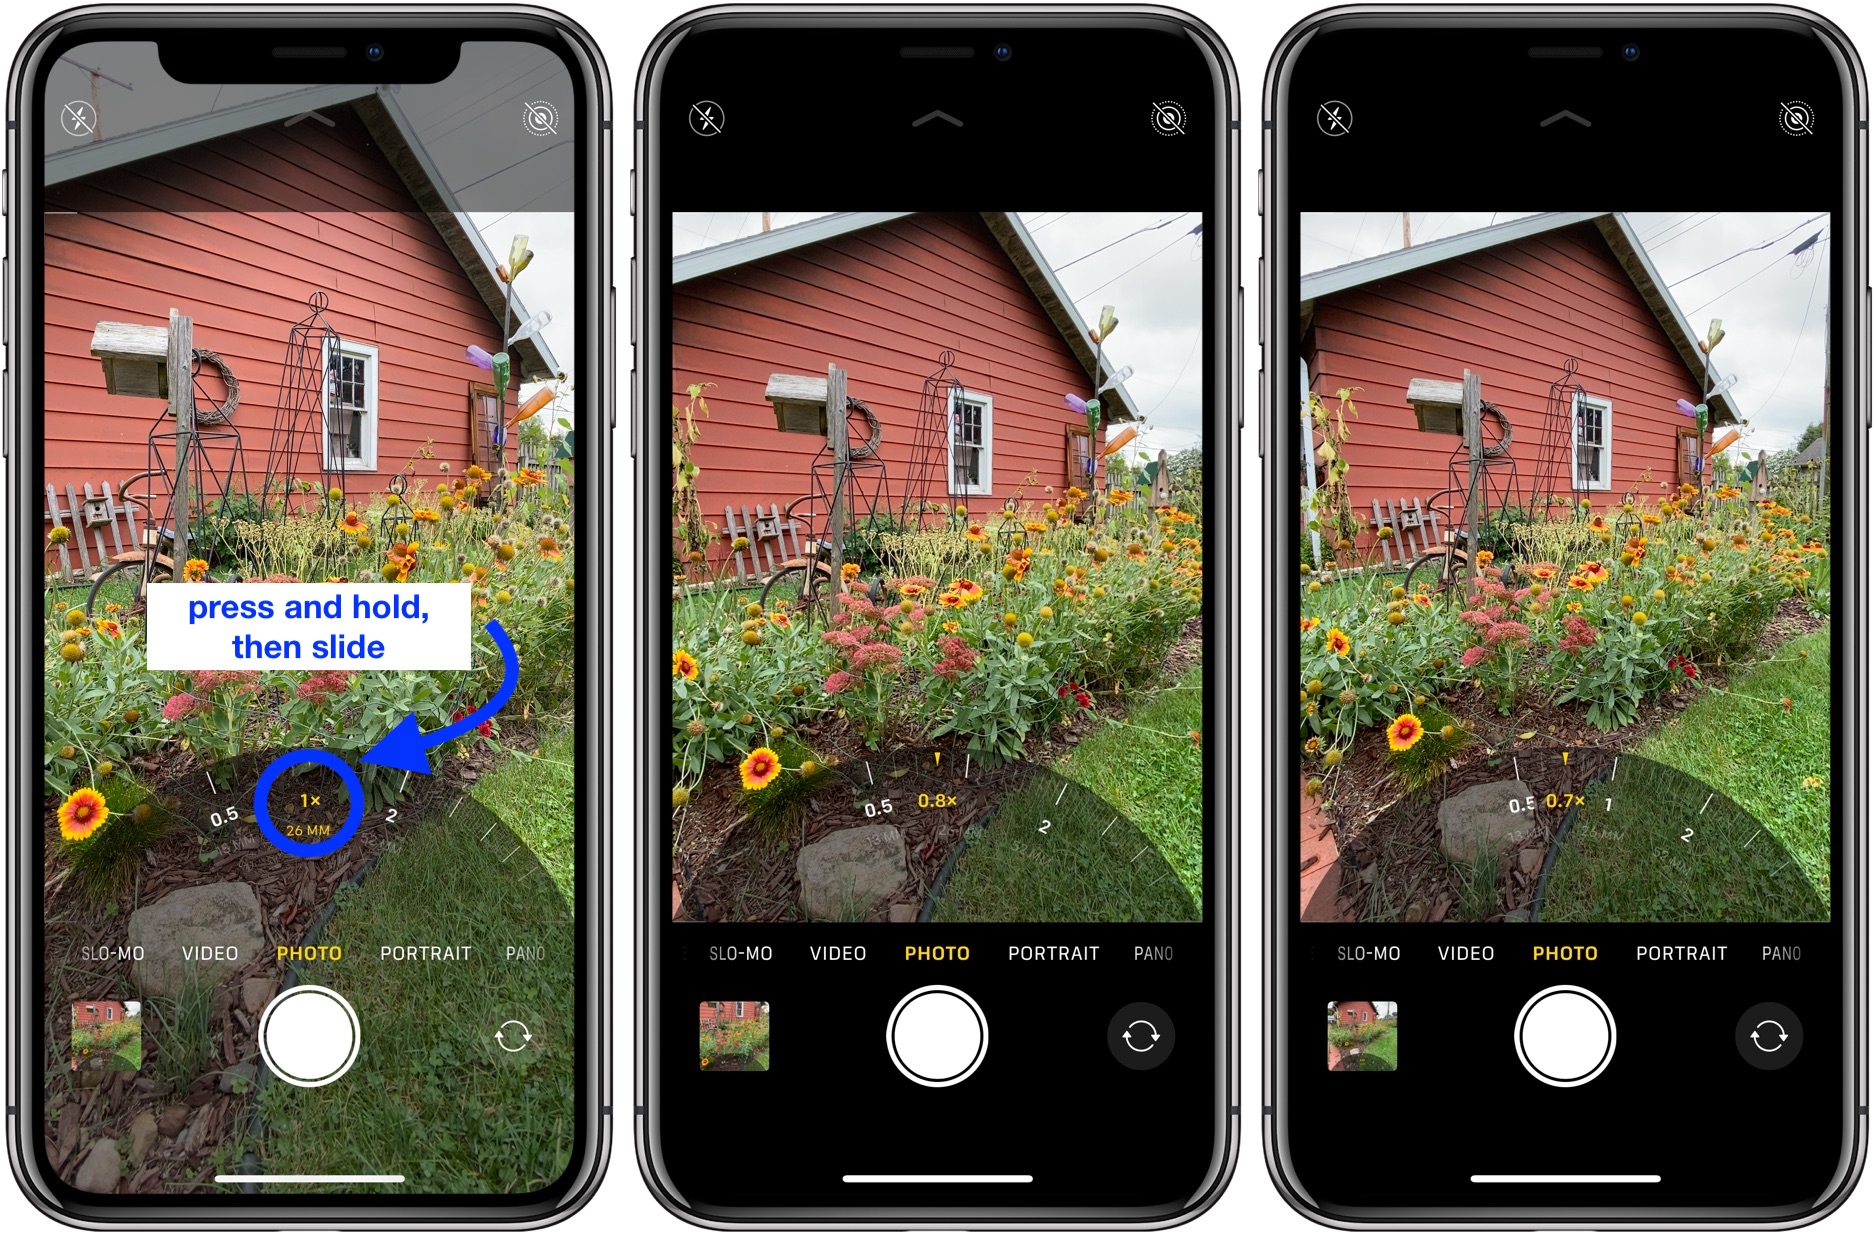 How to use ultra wide camera iPhone 11 and 11 Pro walkthrough 2